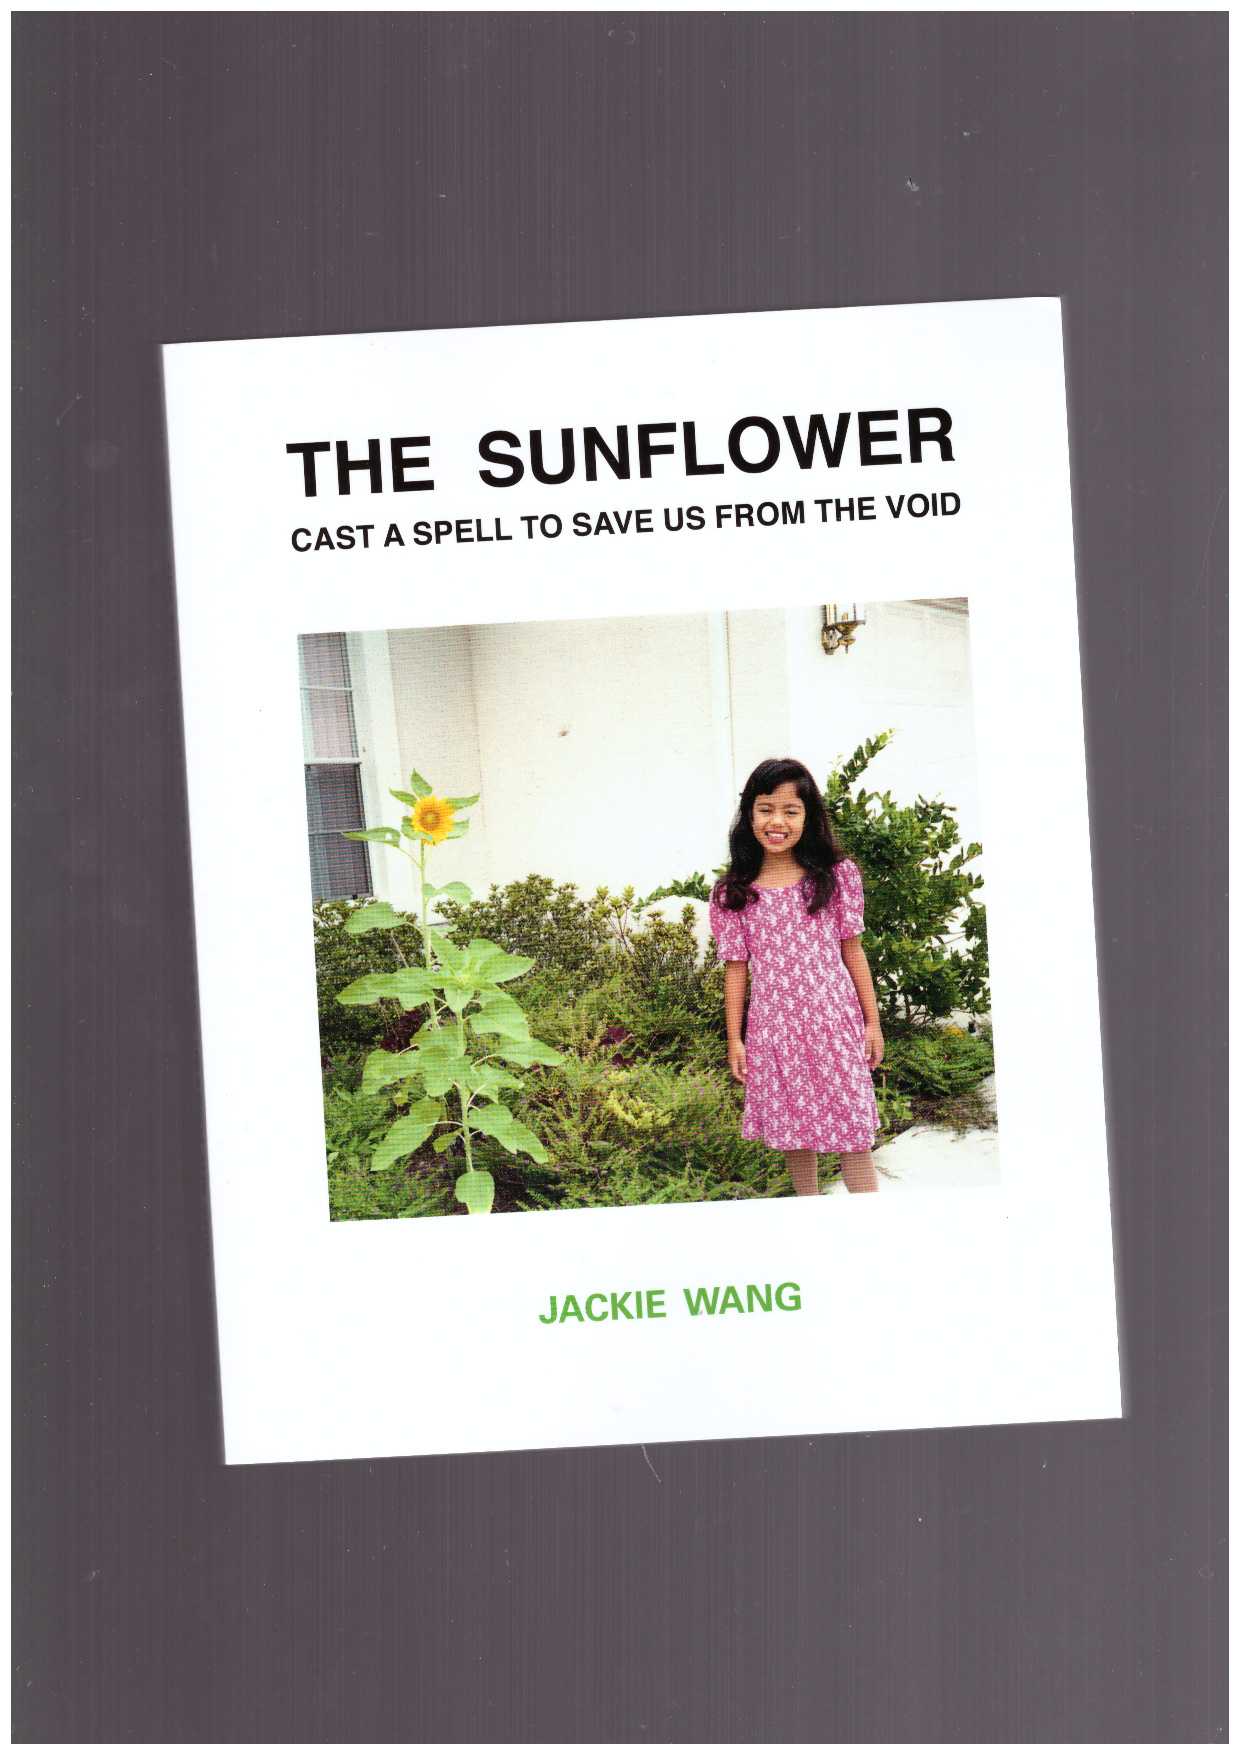 WANG, Jackie - The Sunflower Cast A Spell To Save Us From The Void